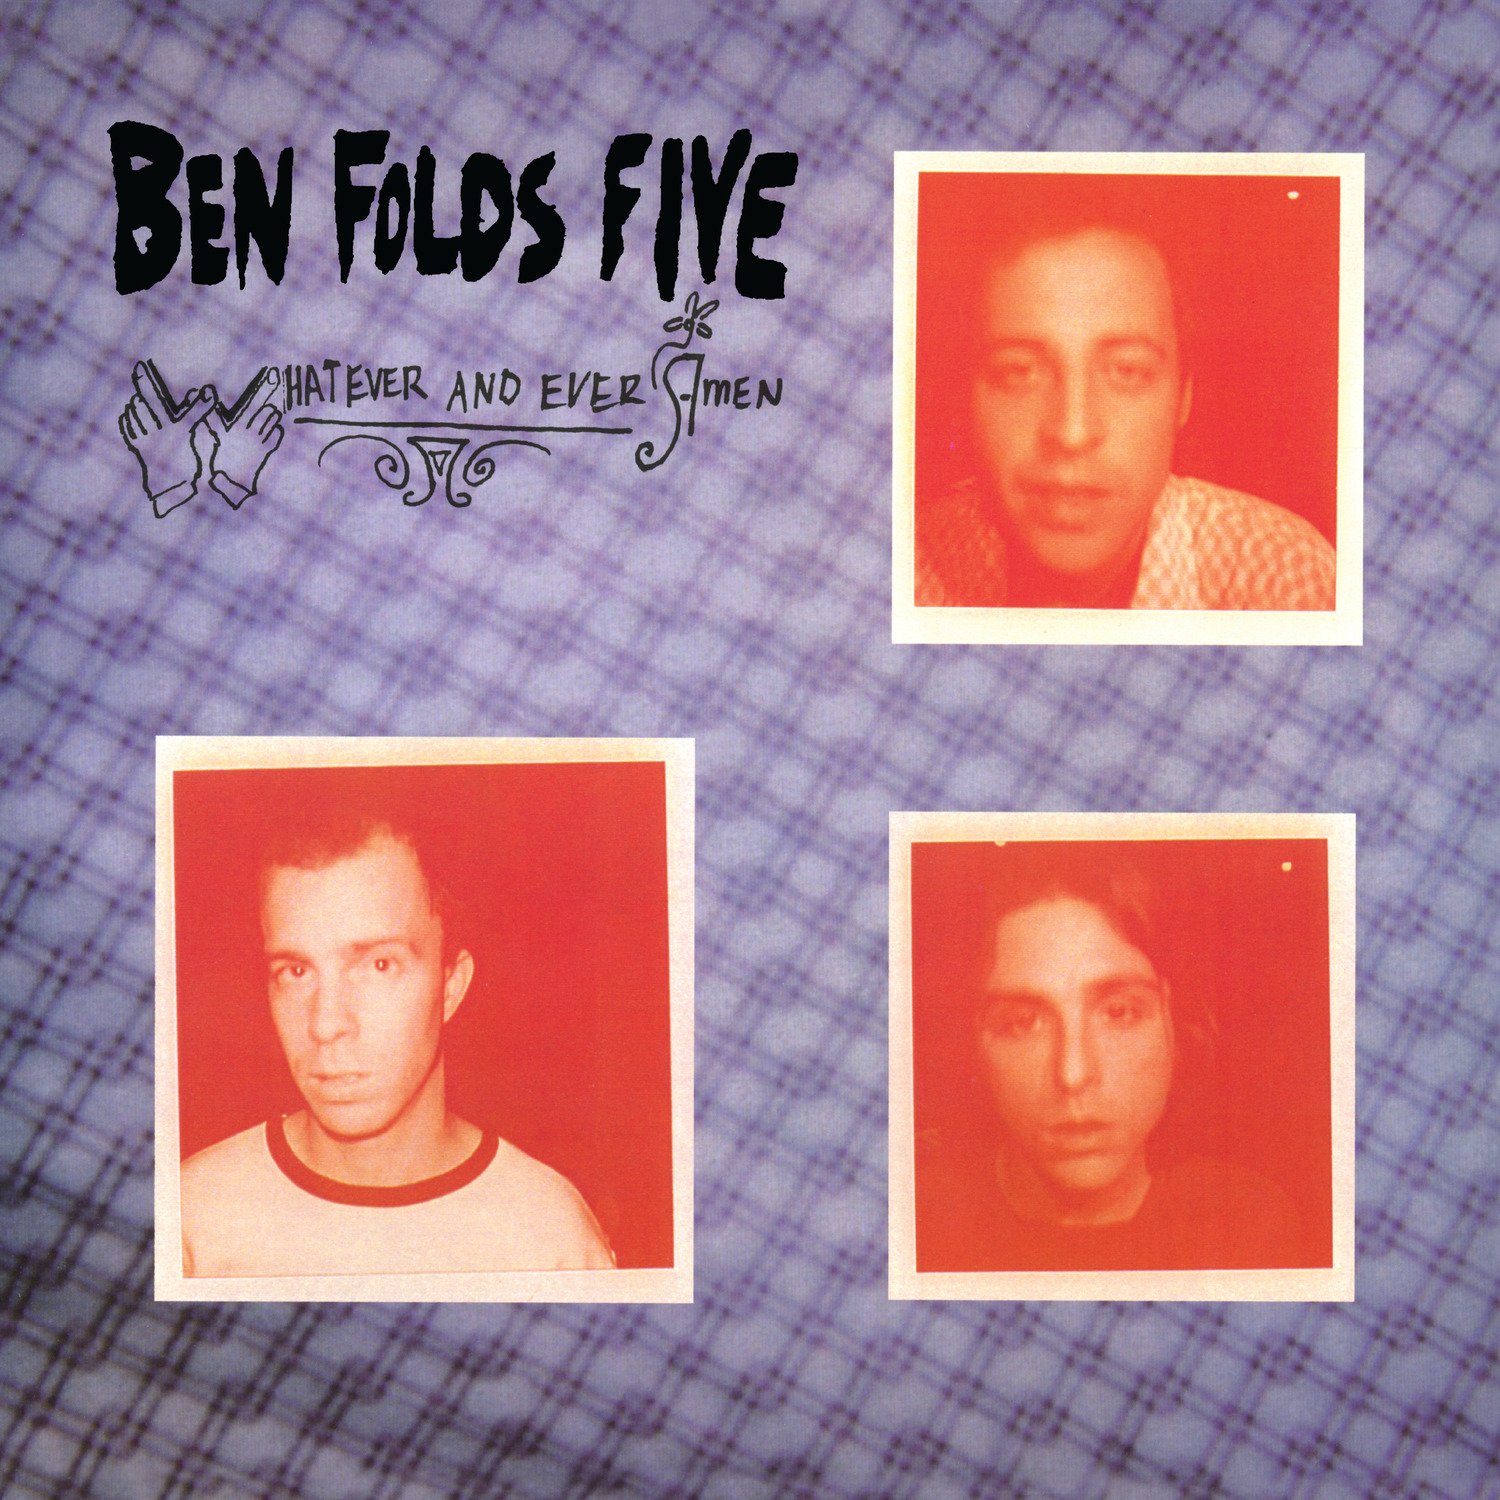 CD Shop - BEN FOLDS FIVE WHATEVER AND EVER AMEN